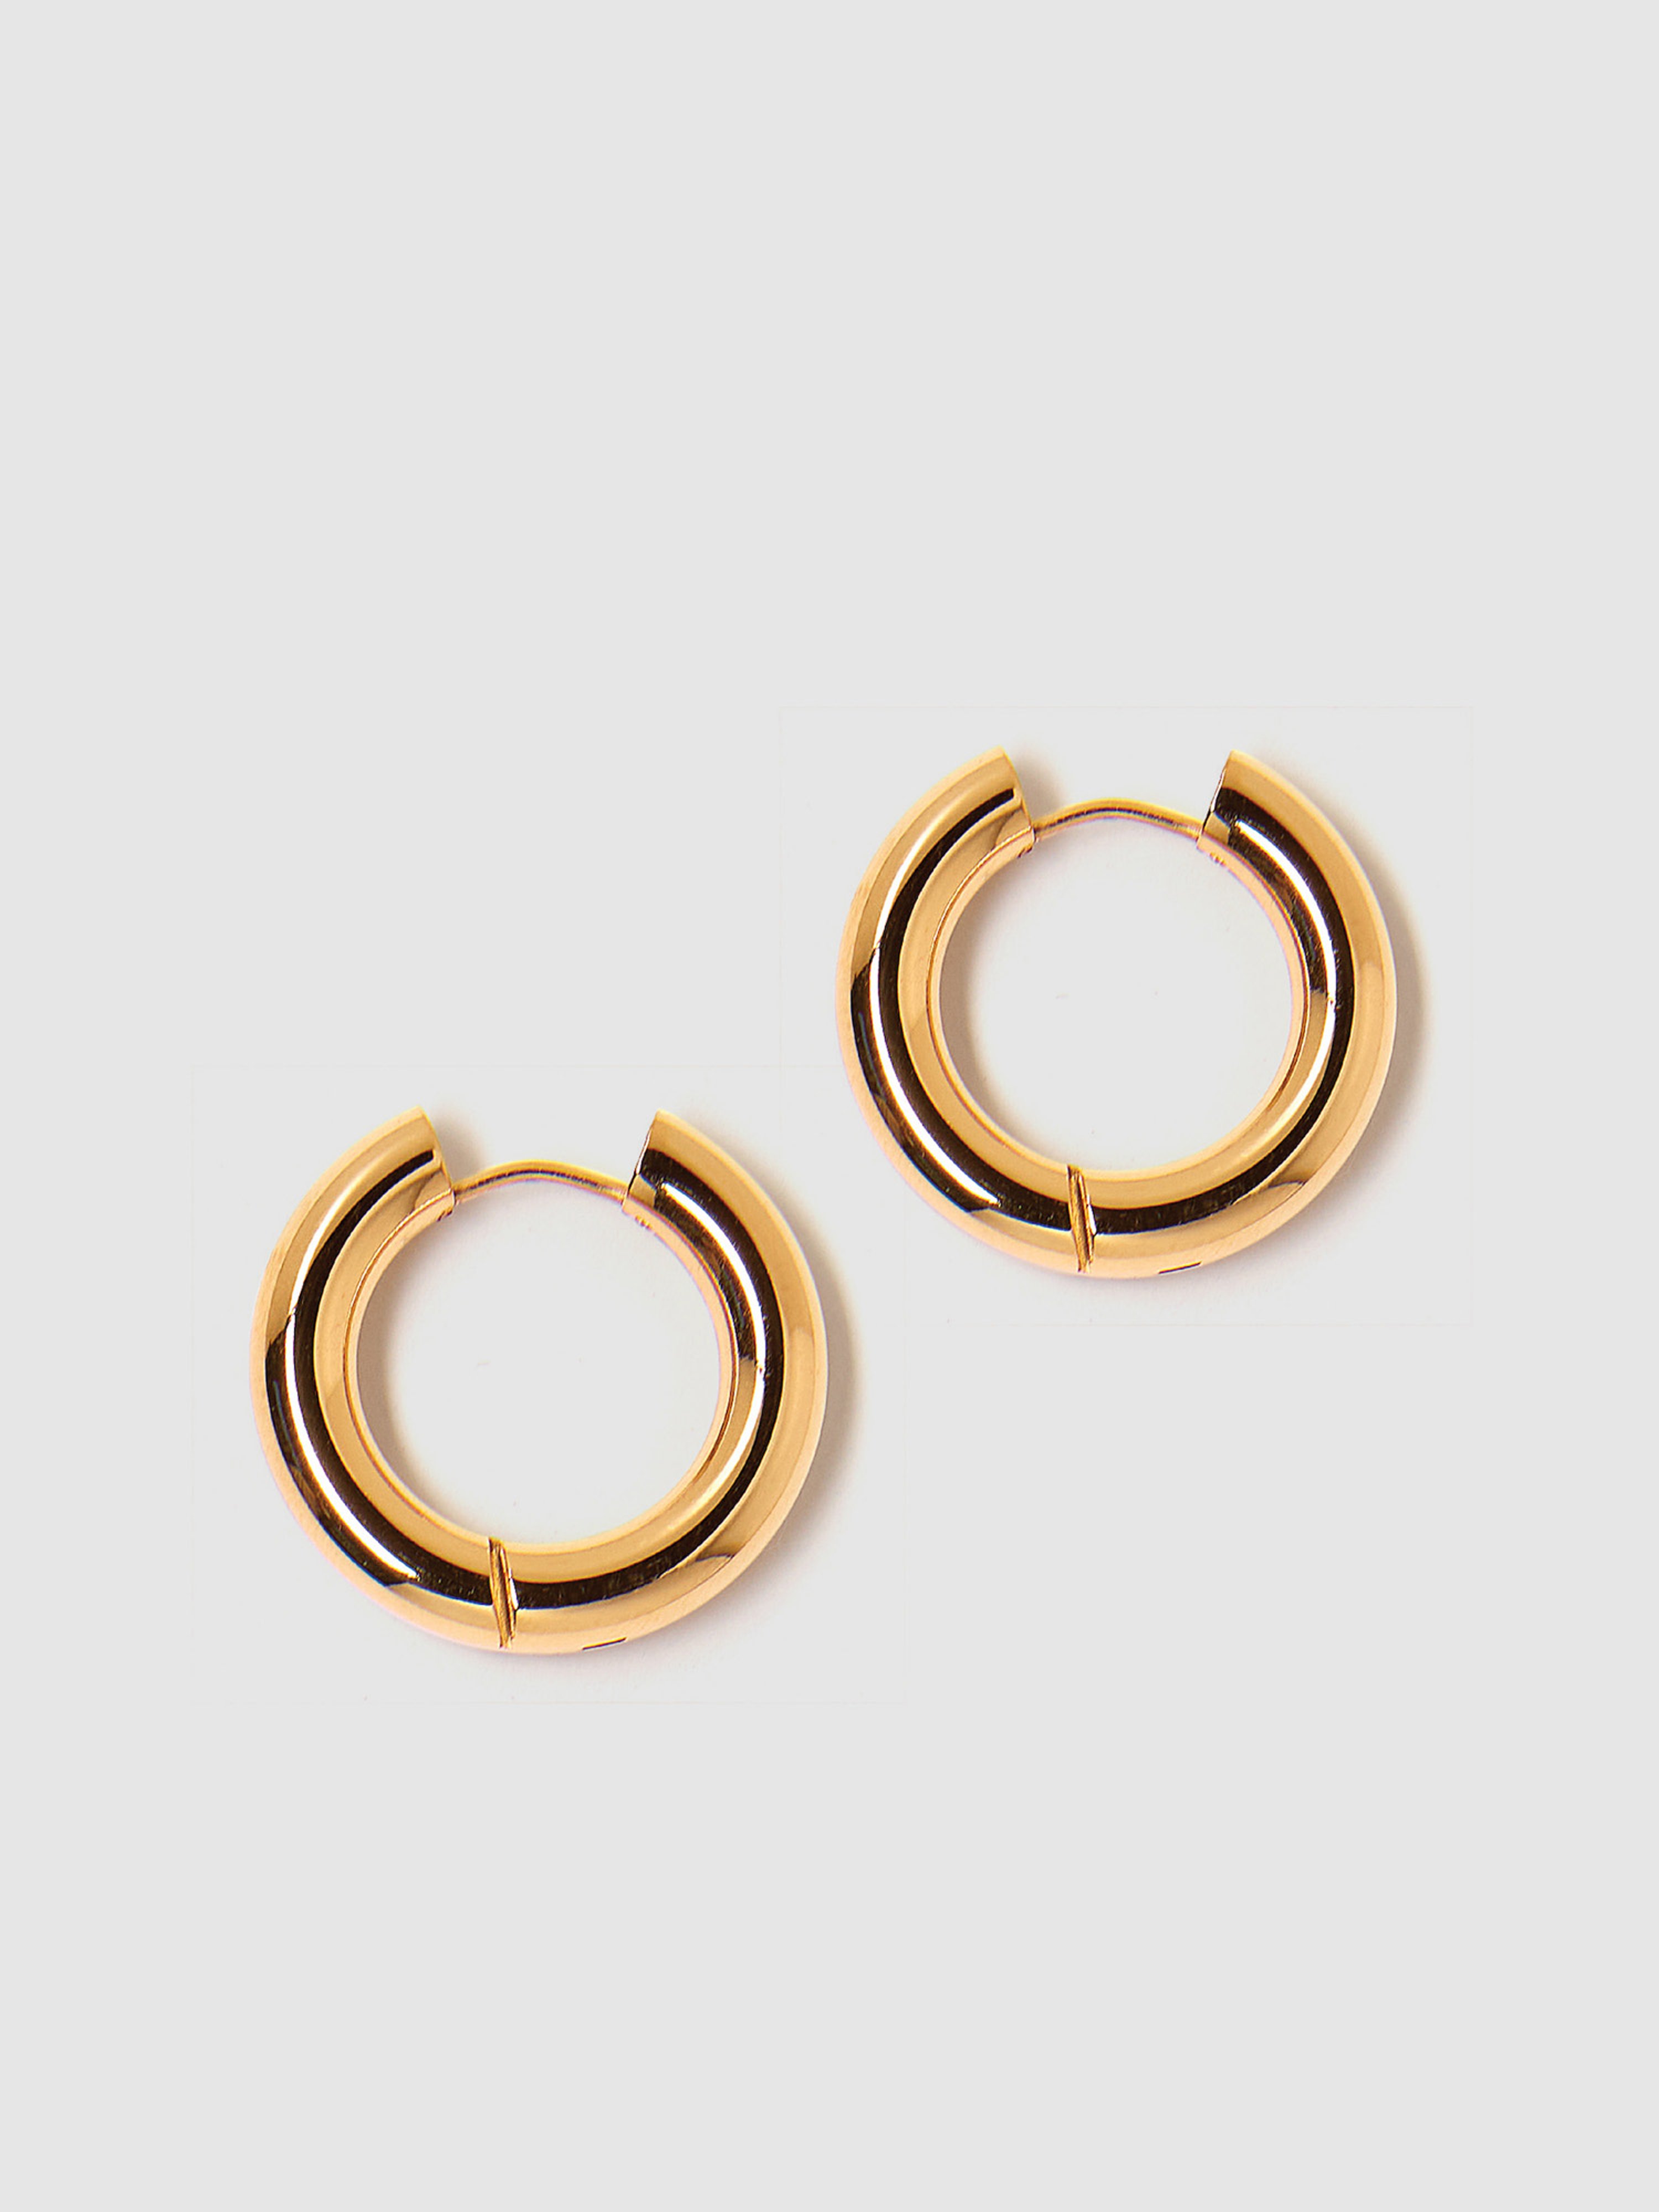 TESS + TRICIA TESS + TRICIA ESTELLE LARGE HOOP EARRING